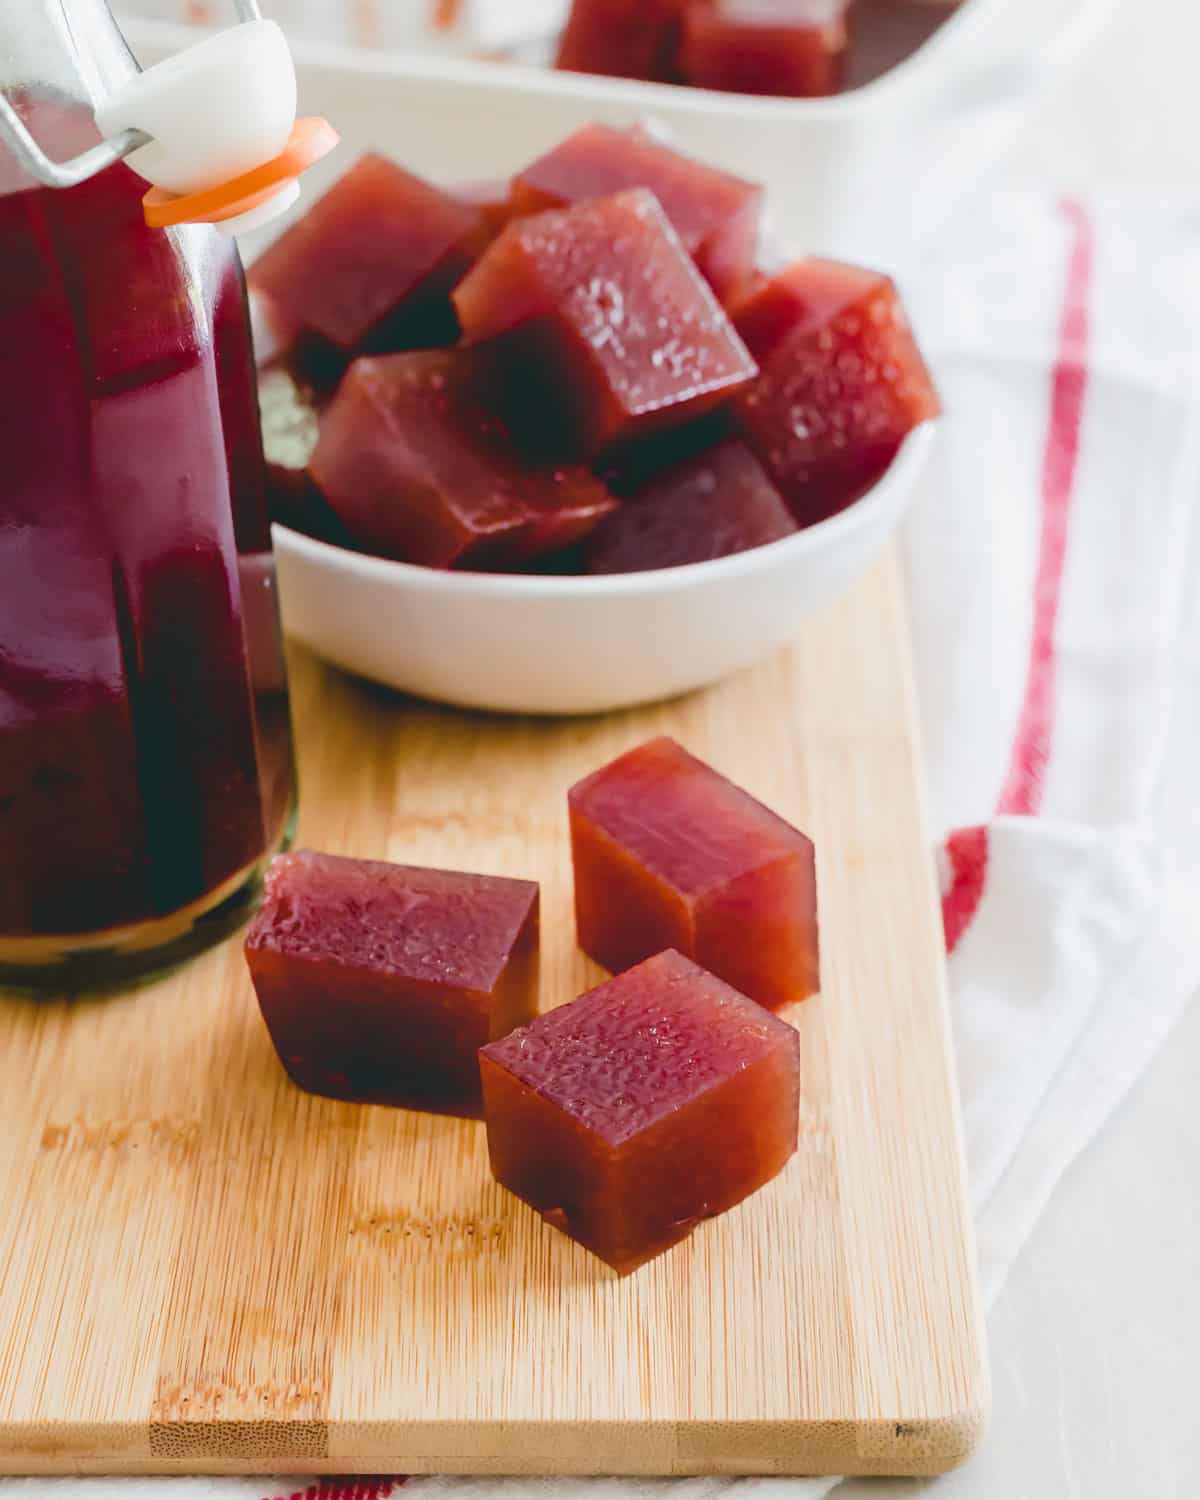 Tart cherry sleep gummies made with four simple ingredients and no added sugar.